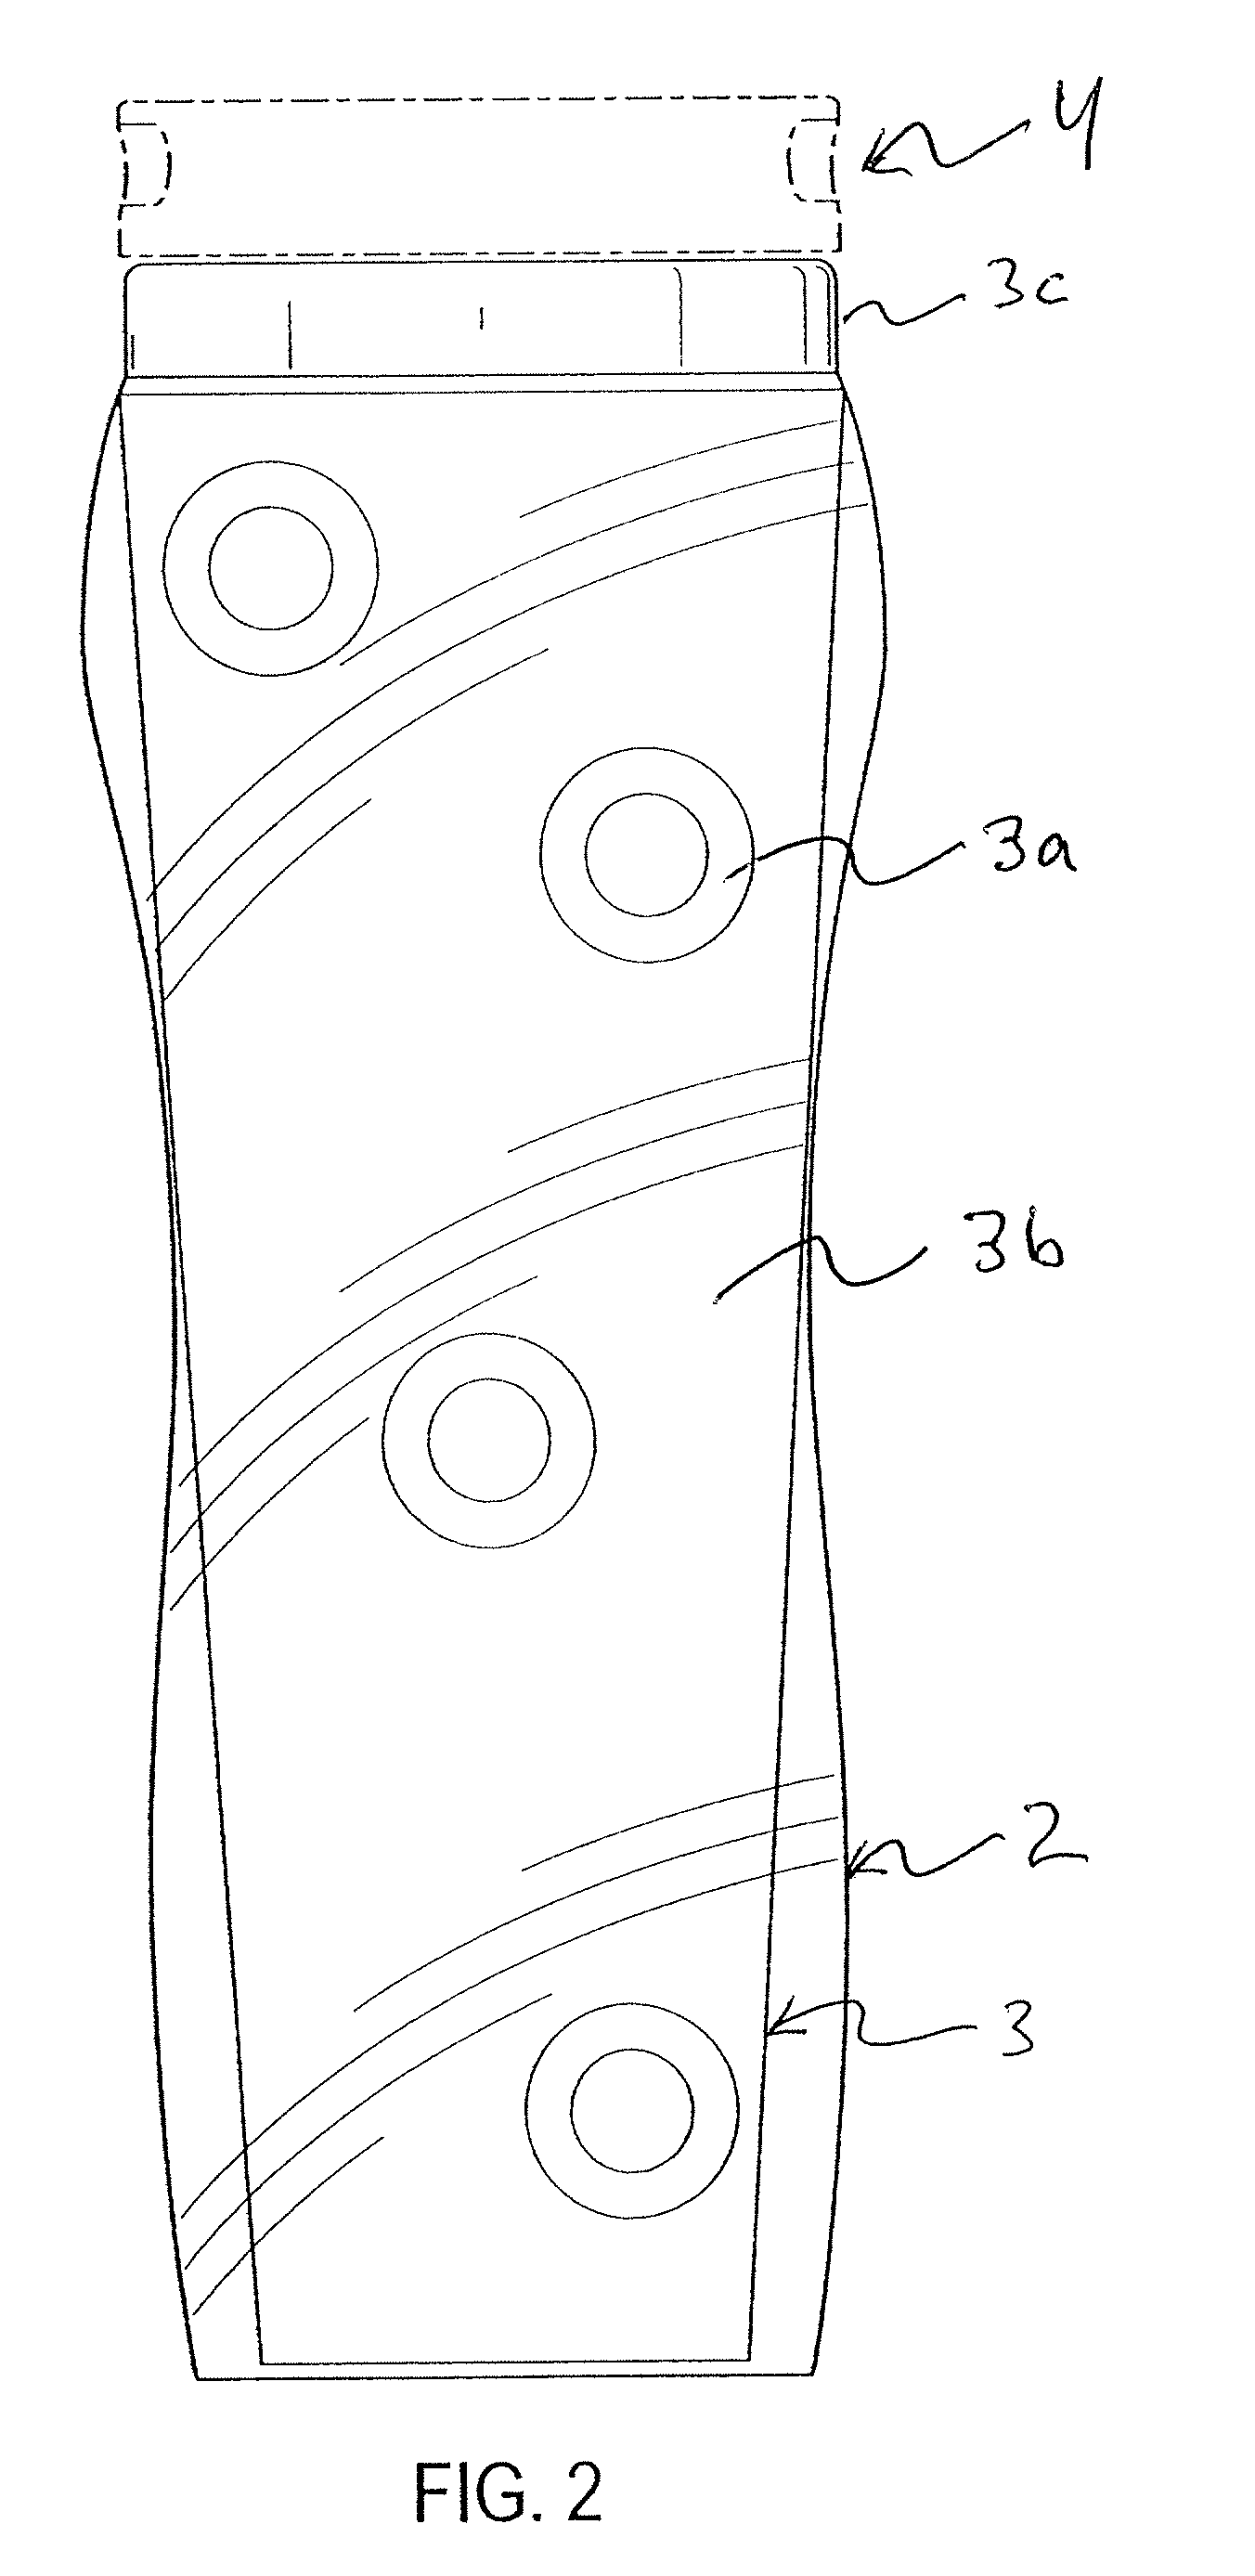 Dual-wall container with heat activated and/or temperature-change activated color changing capability